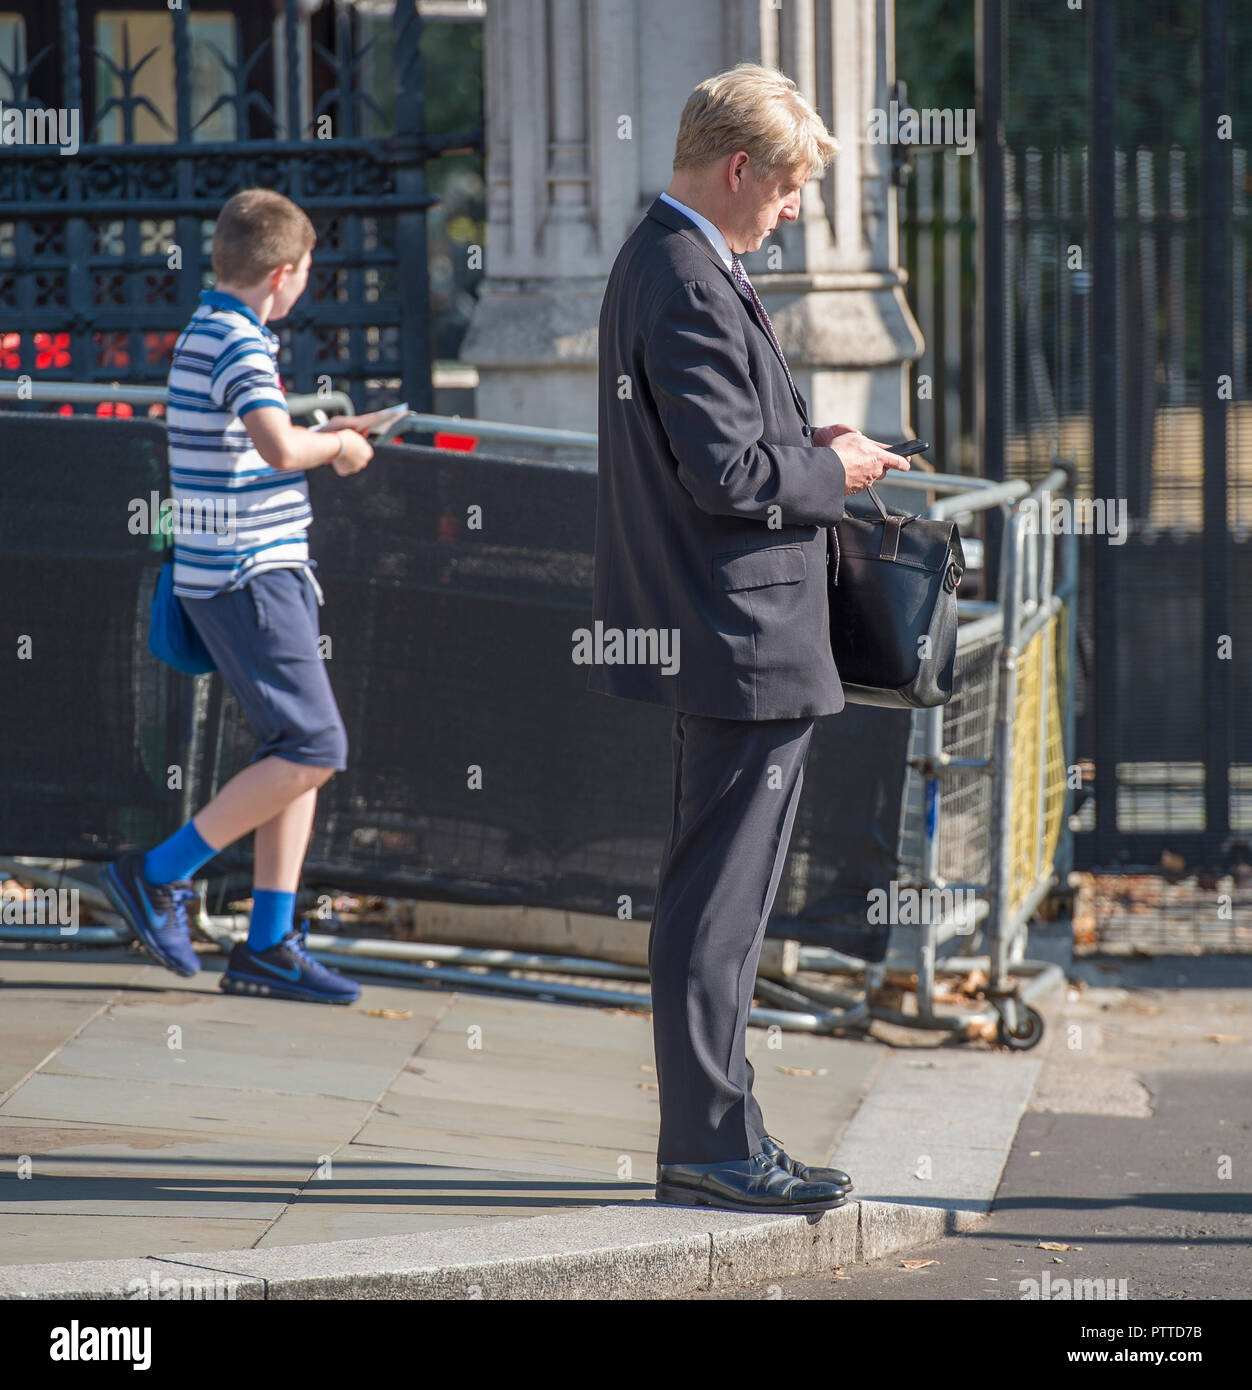 Parliament Square, London, UK. 10 October, 2018. Jo Johnson MP, Minister of State for the Department of Transport and brother to Boris Johnson, checking his phone outside Parliament at mid-day. Credit: Malcolm Park/Alamy Live News. Stock Photo